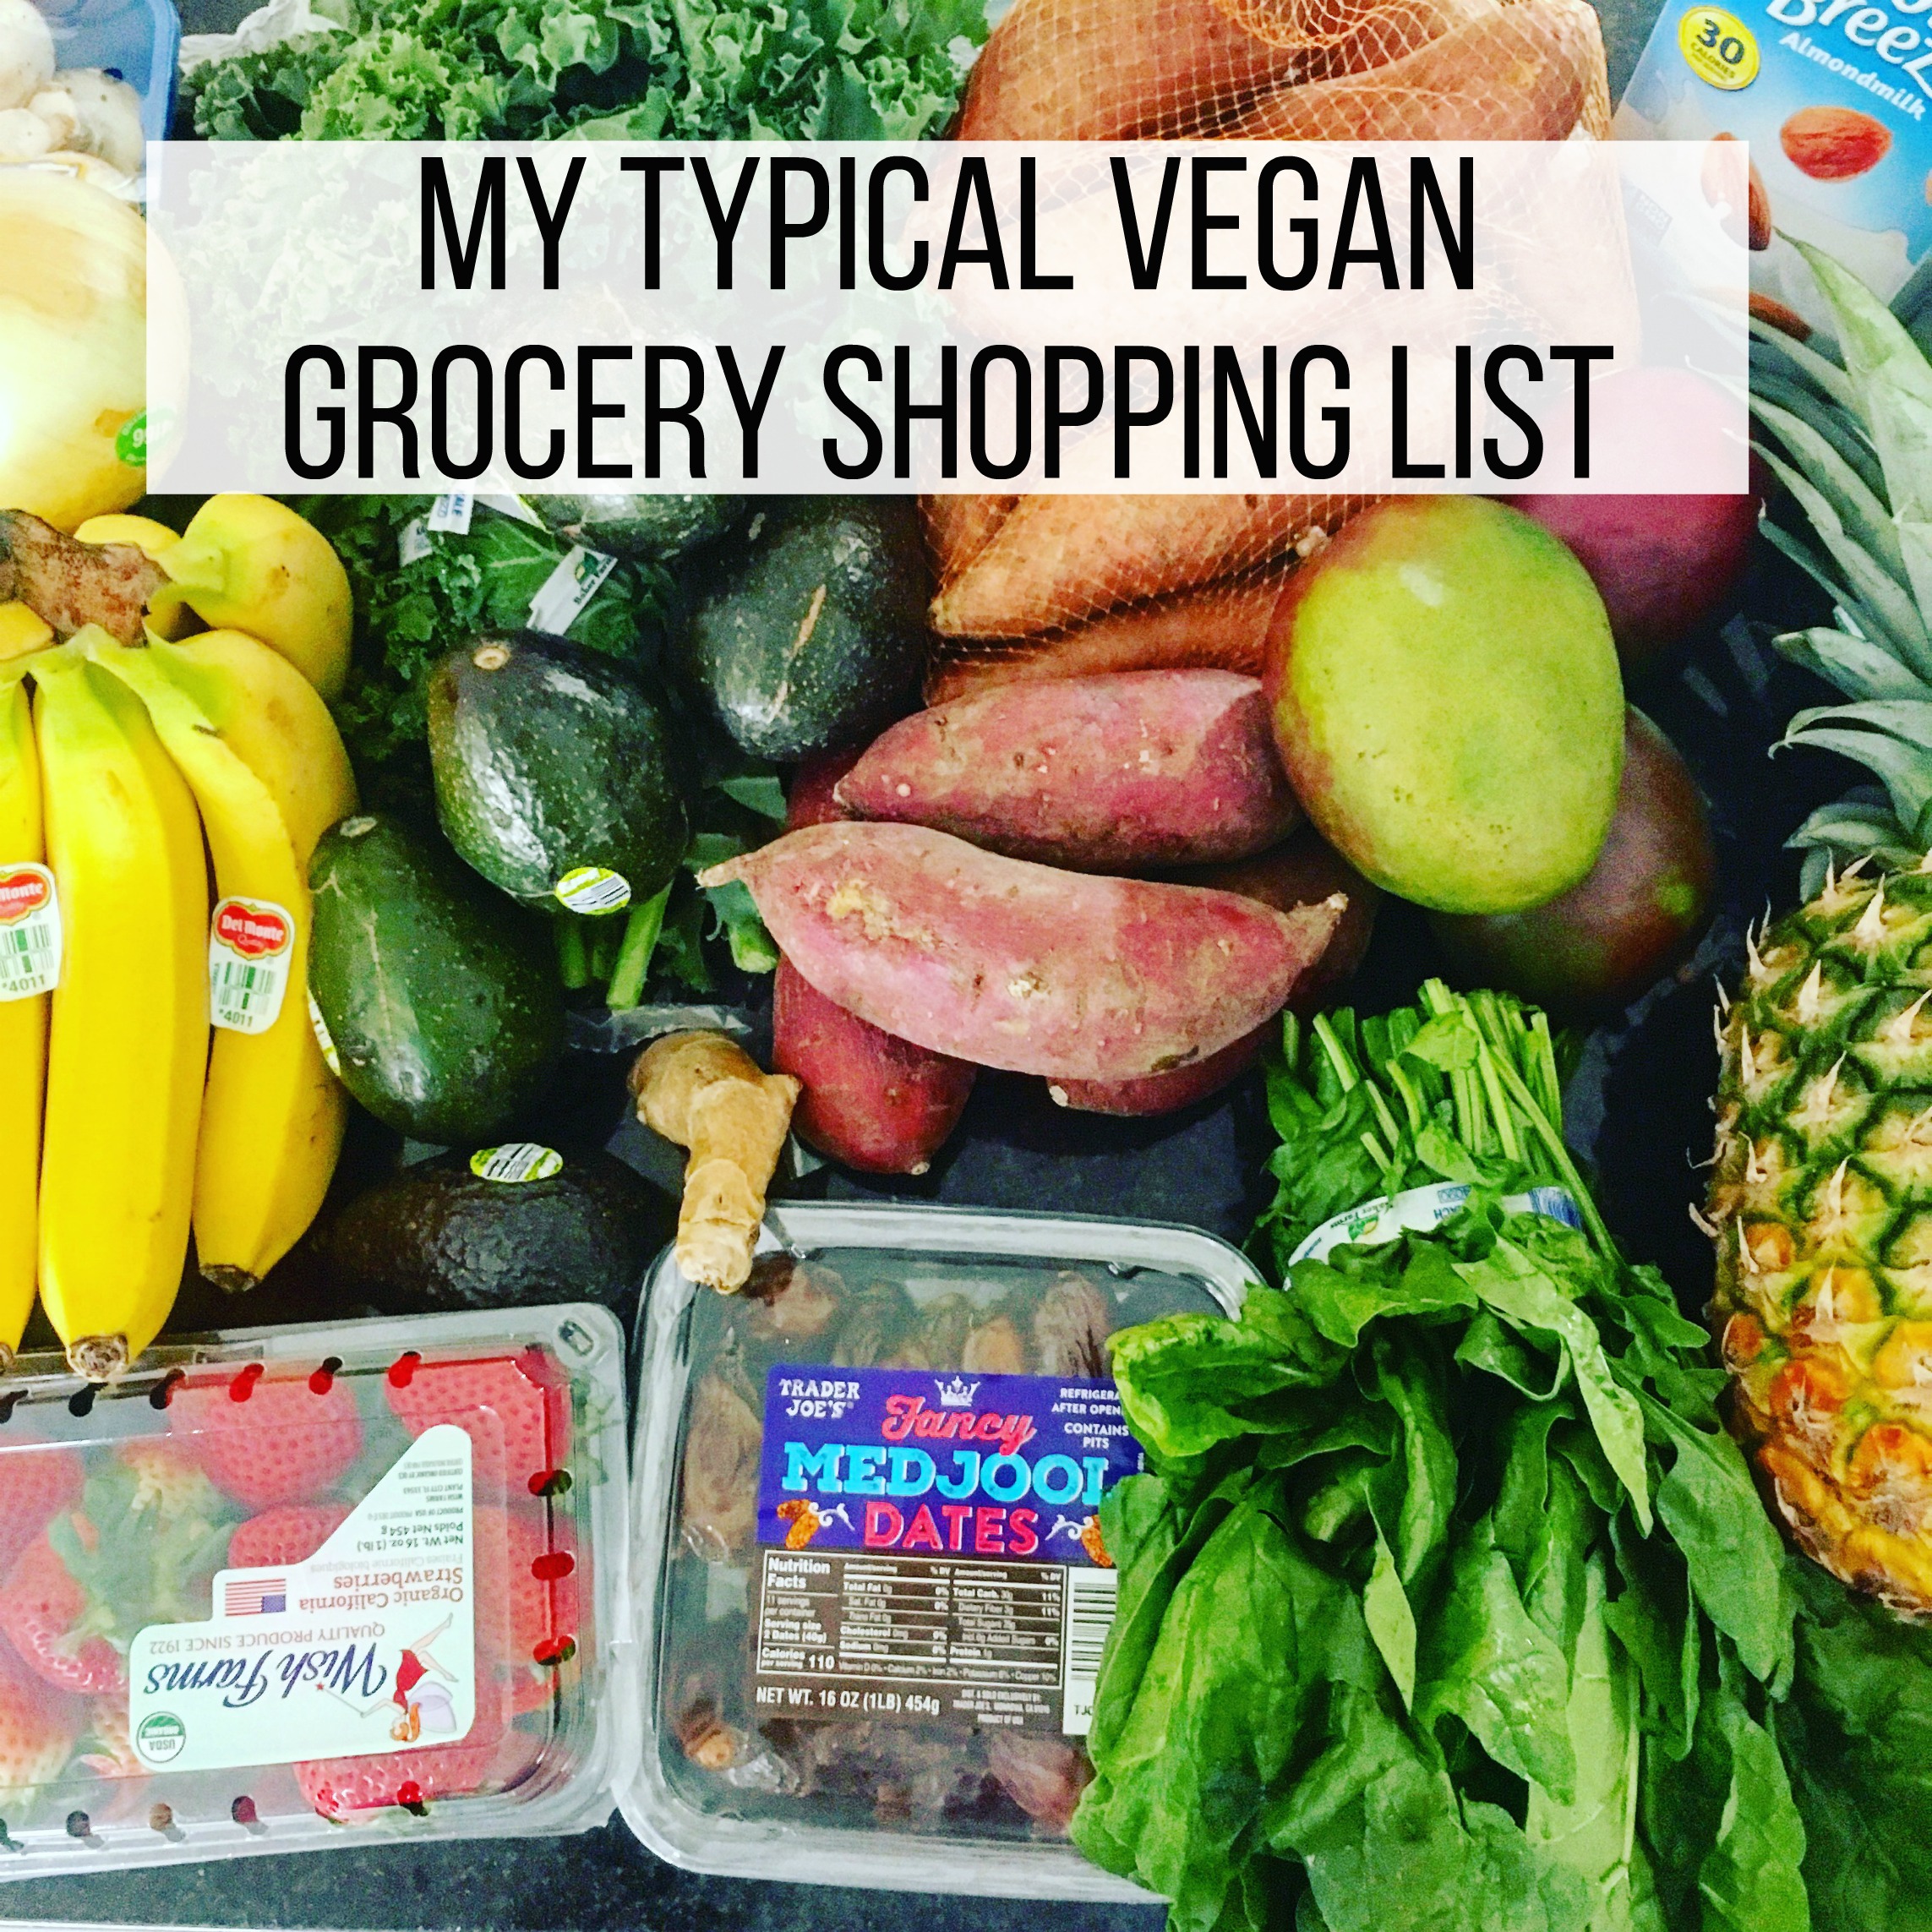 My Typical Vegan Grocery Shopping List | The Friendly Fig